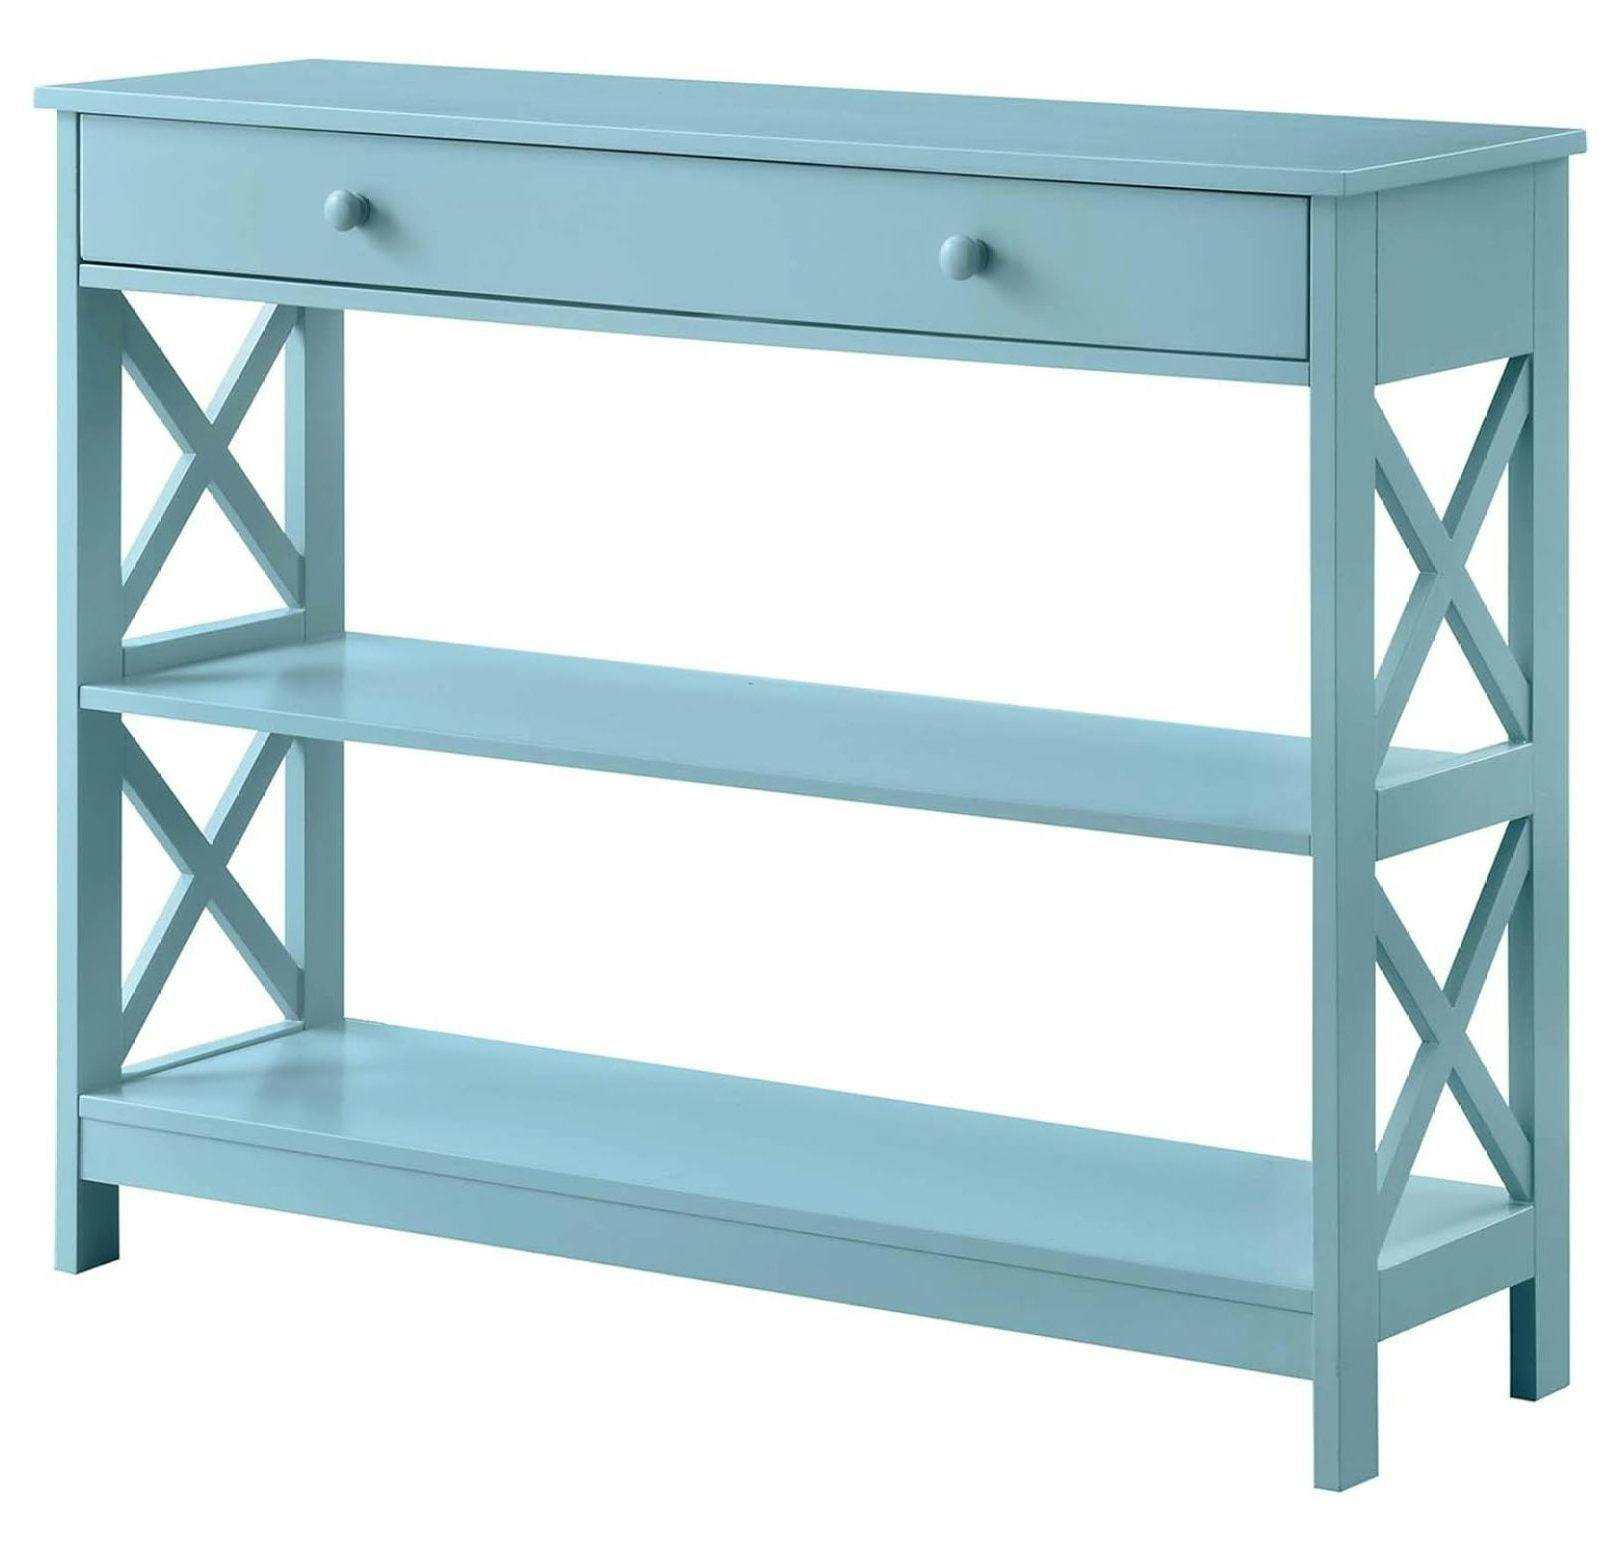 Oxford Sea Foam Blue Console Table with Drawer and Shelves